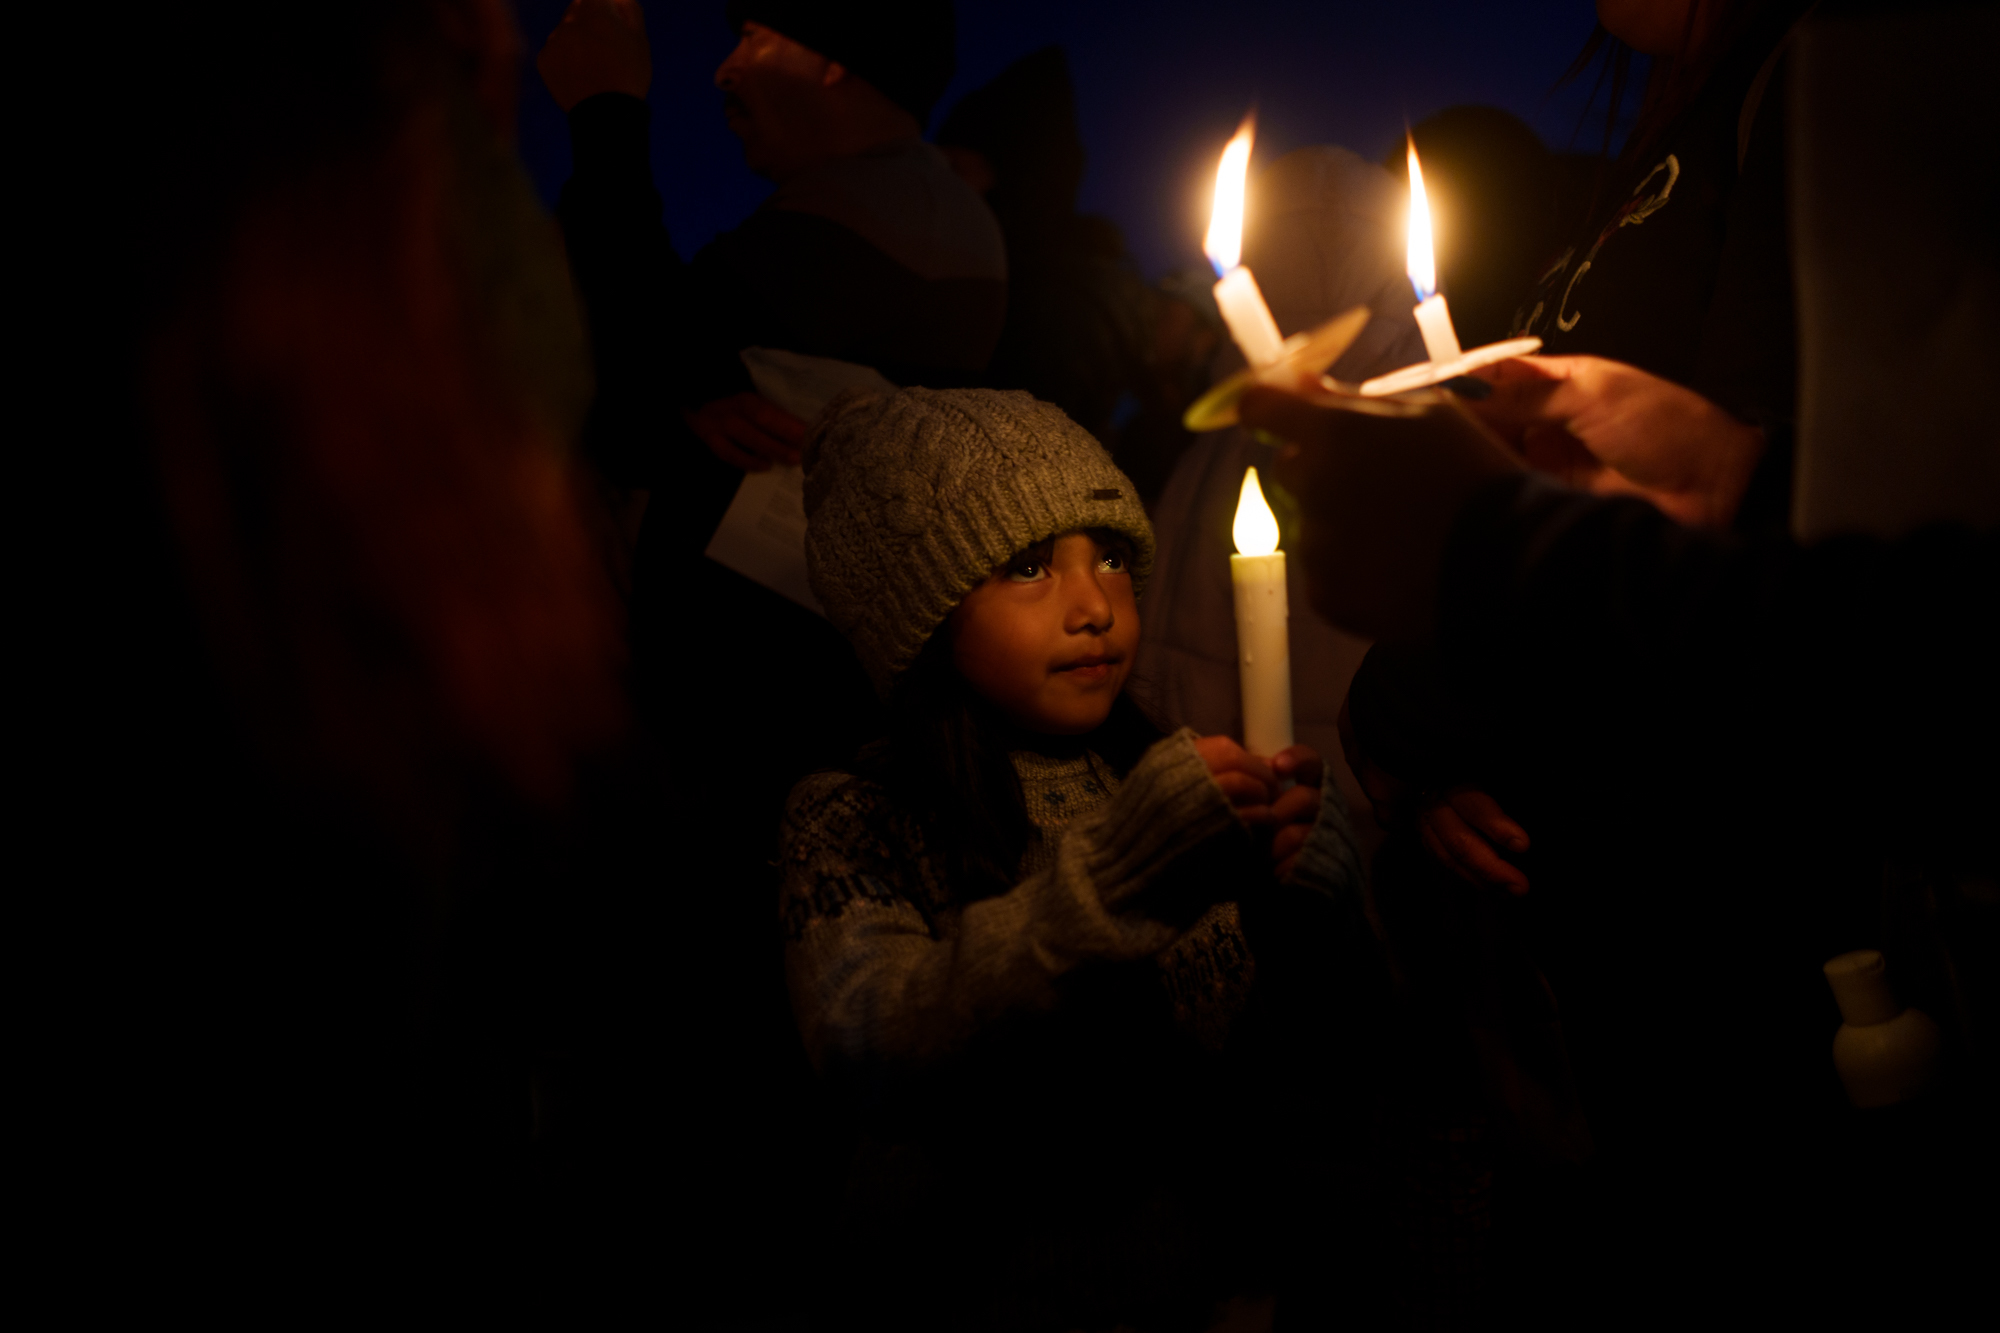 A young girl holds a candle outside in the dark.